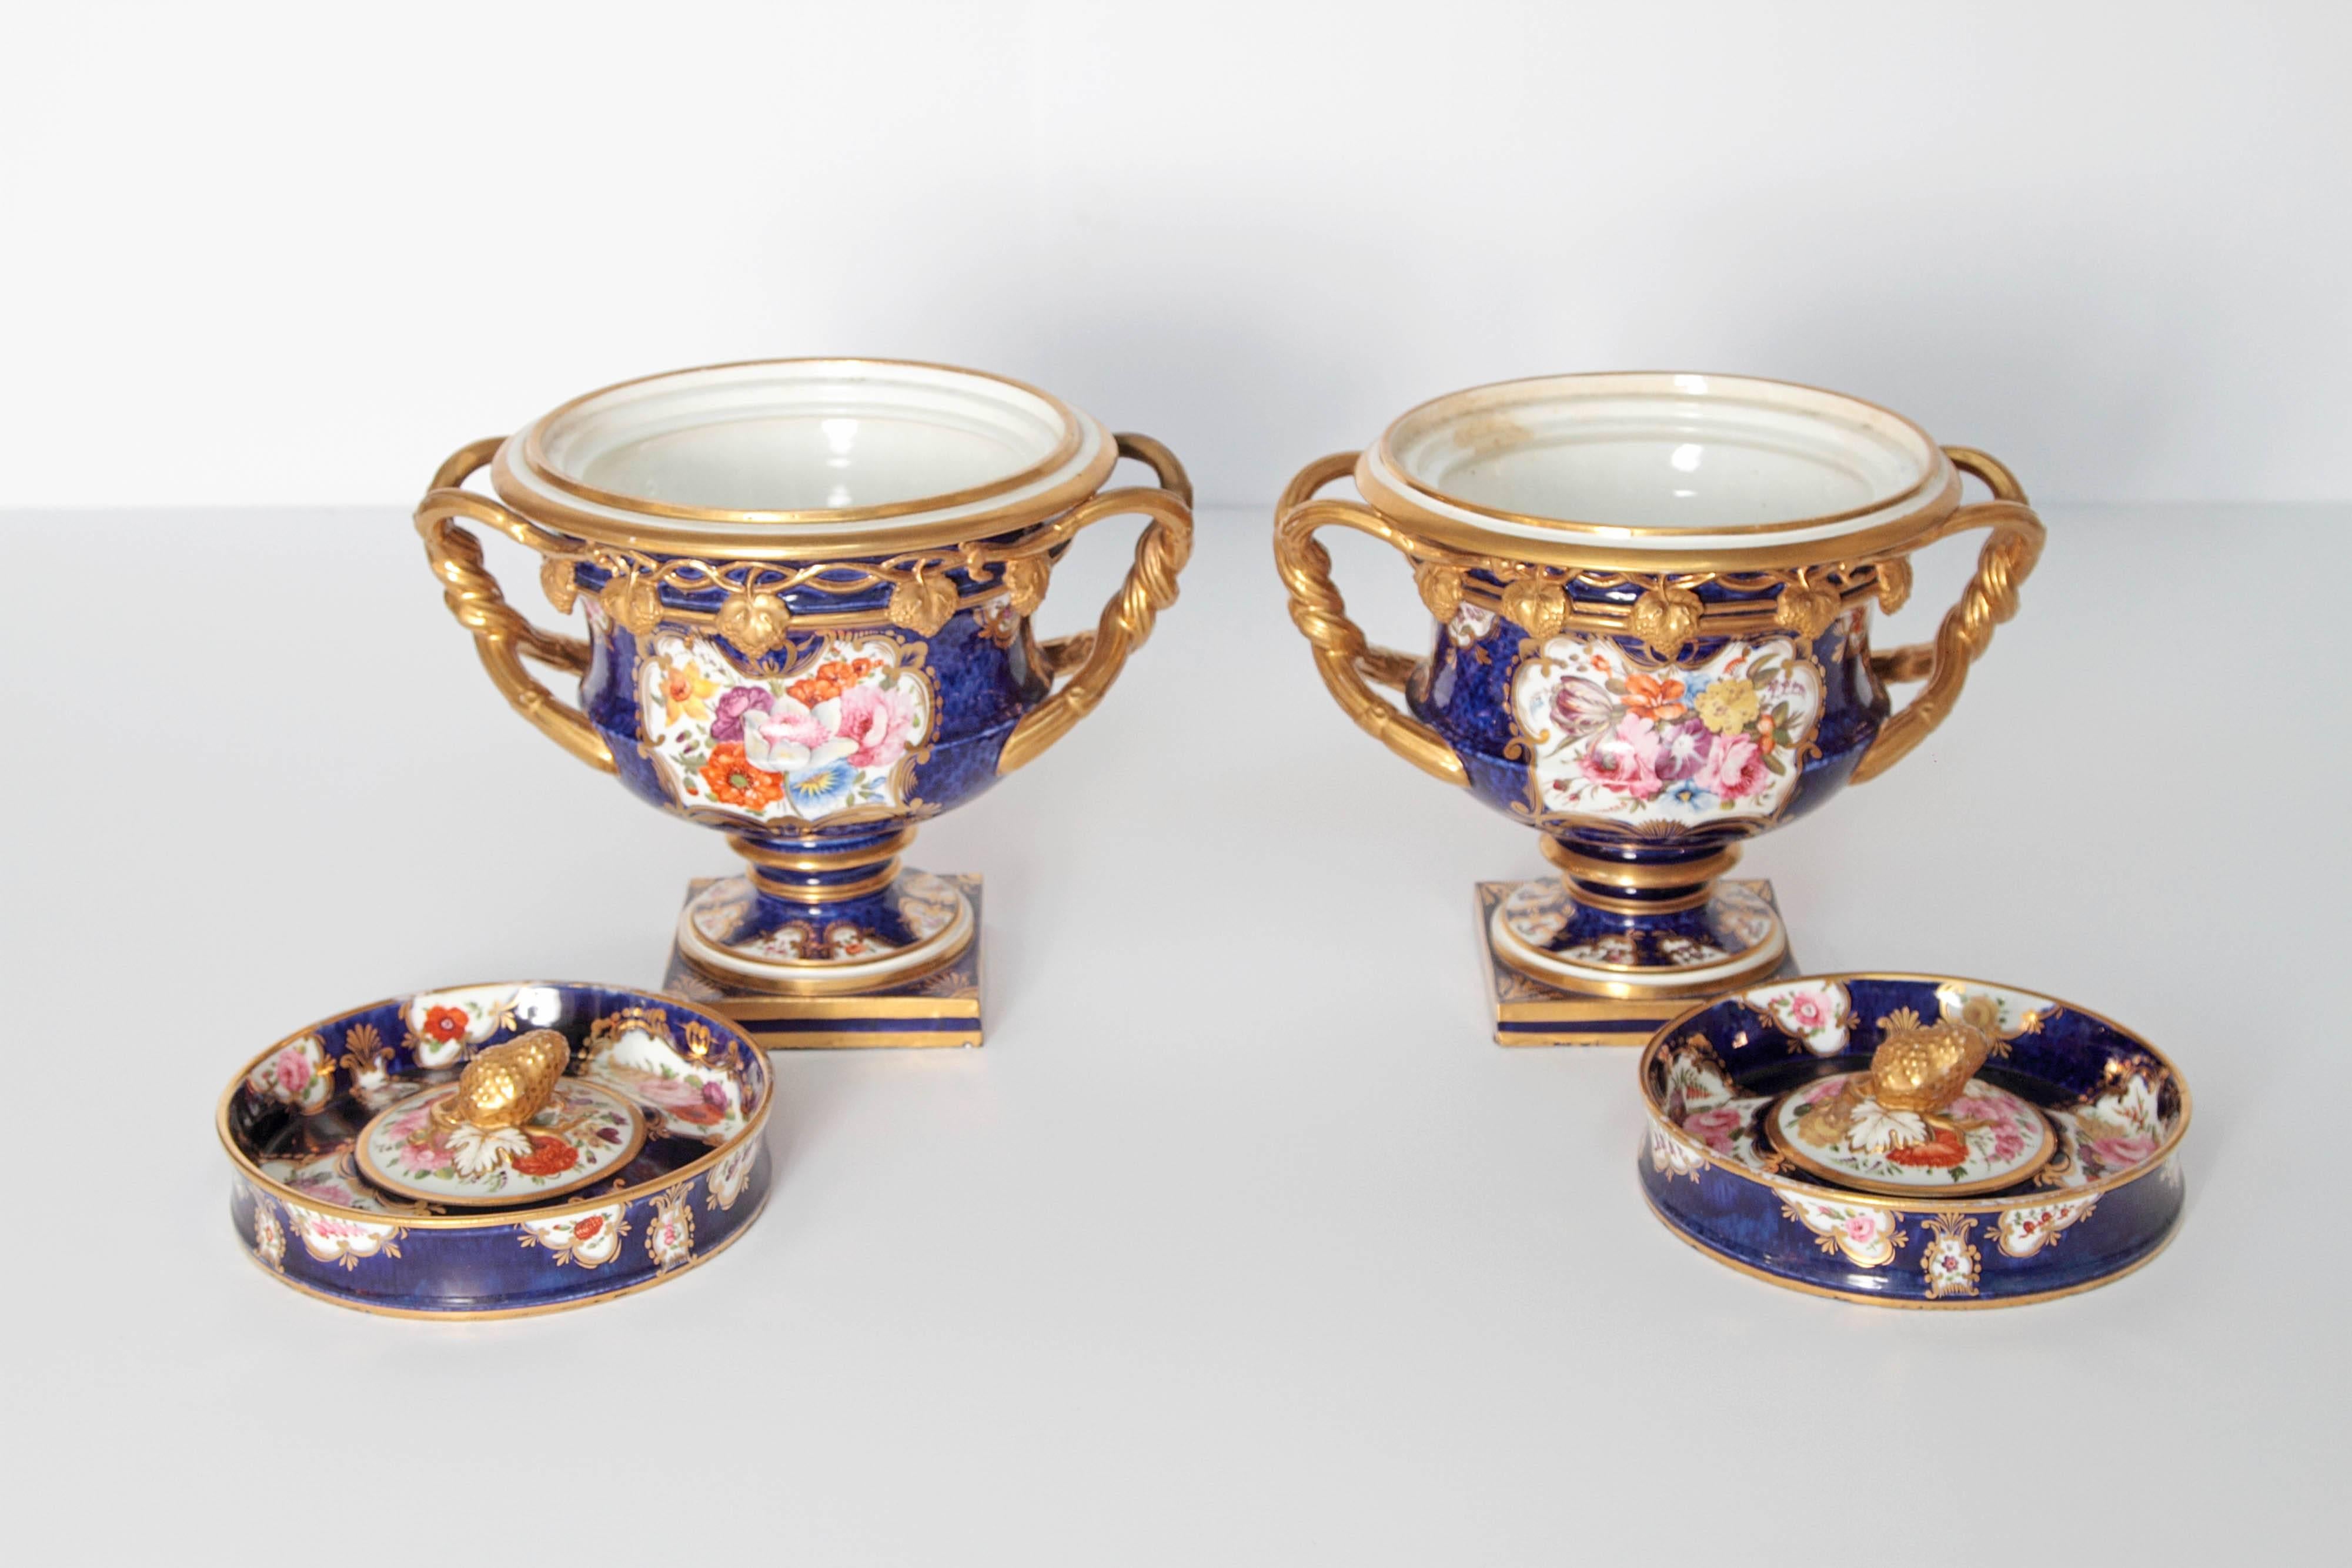 Pair of 19th Century English Porcelain Fruit Coolers with Covers 4